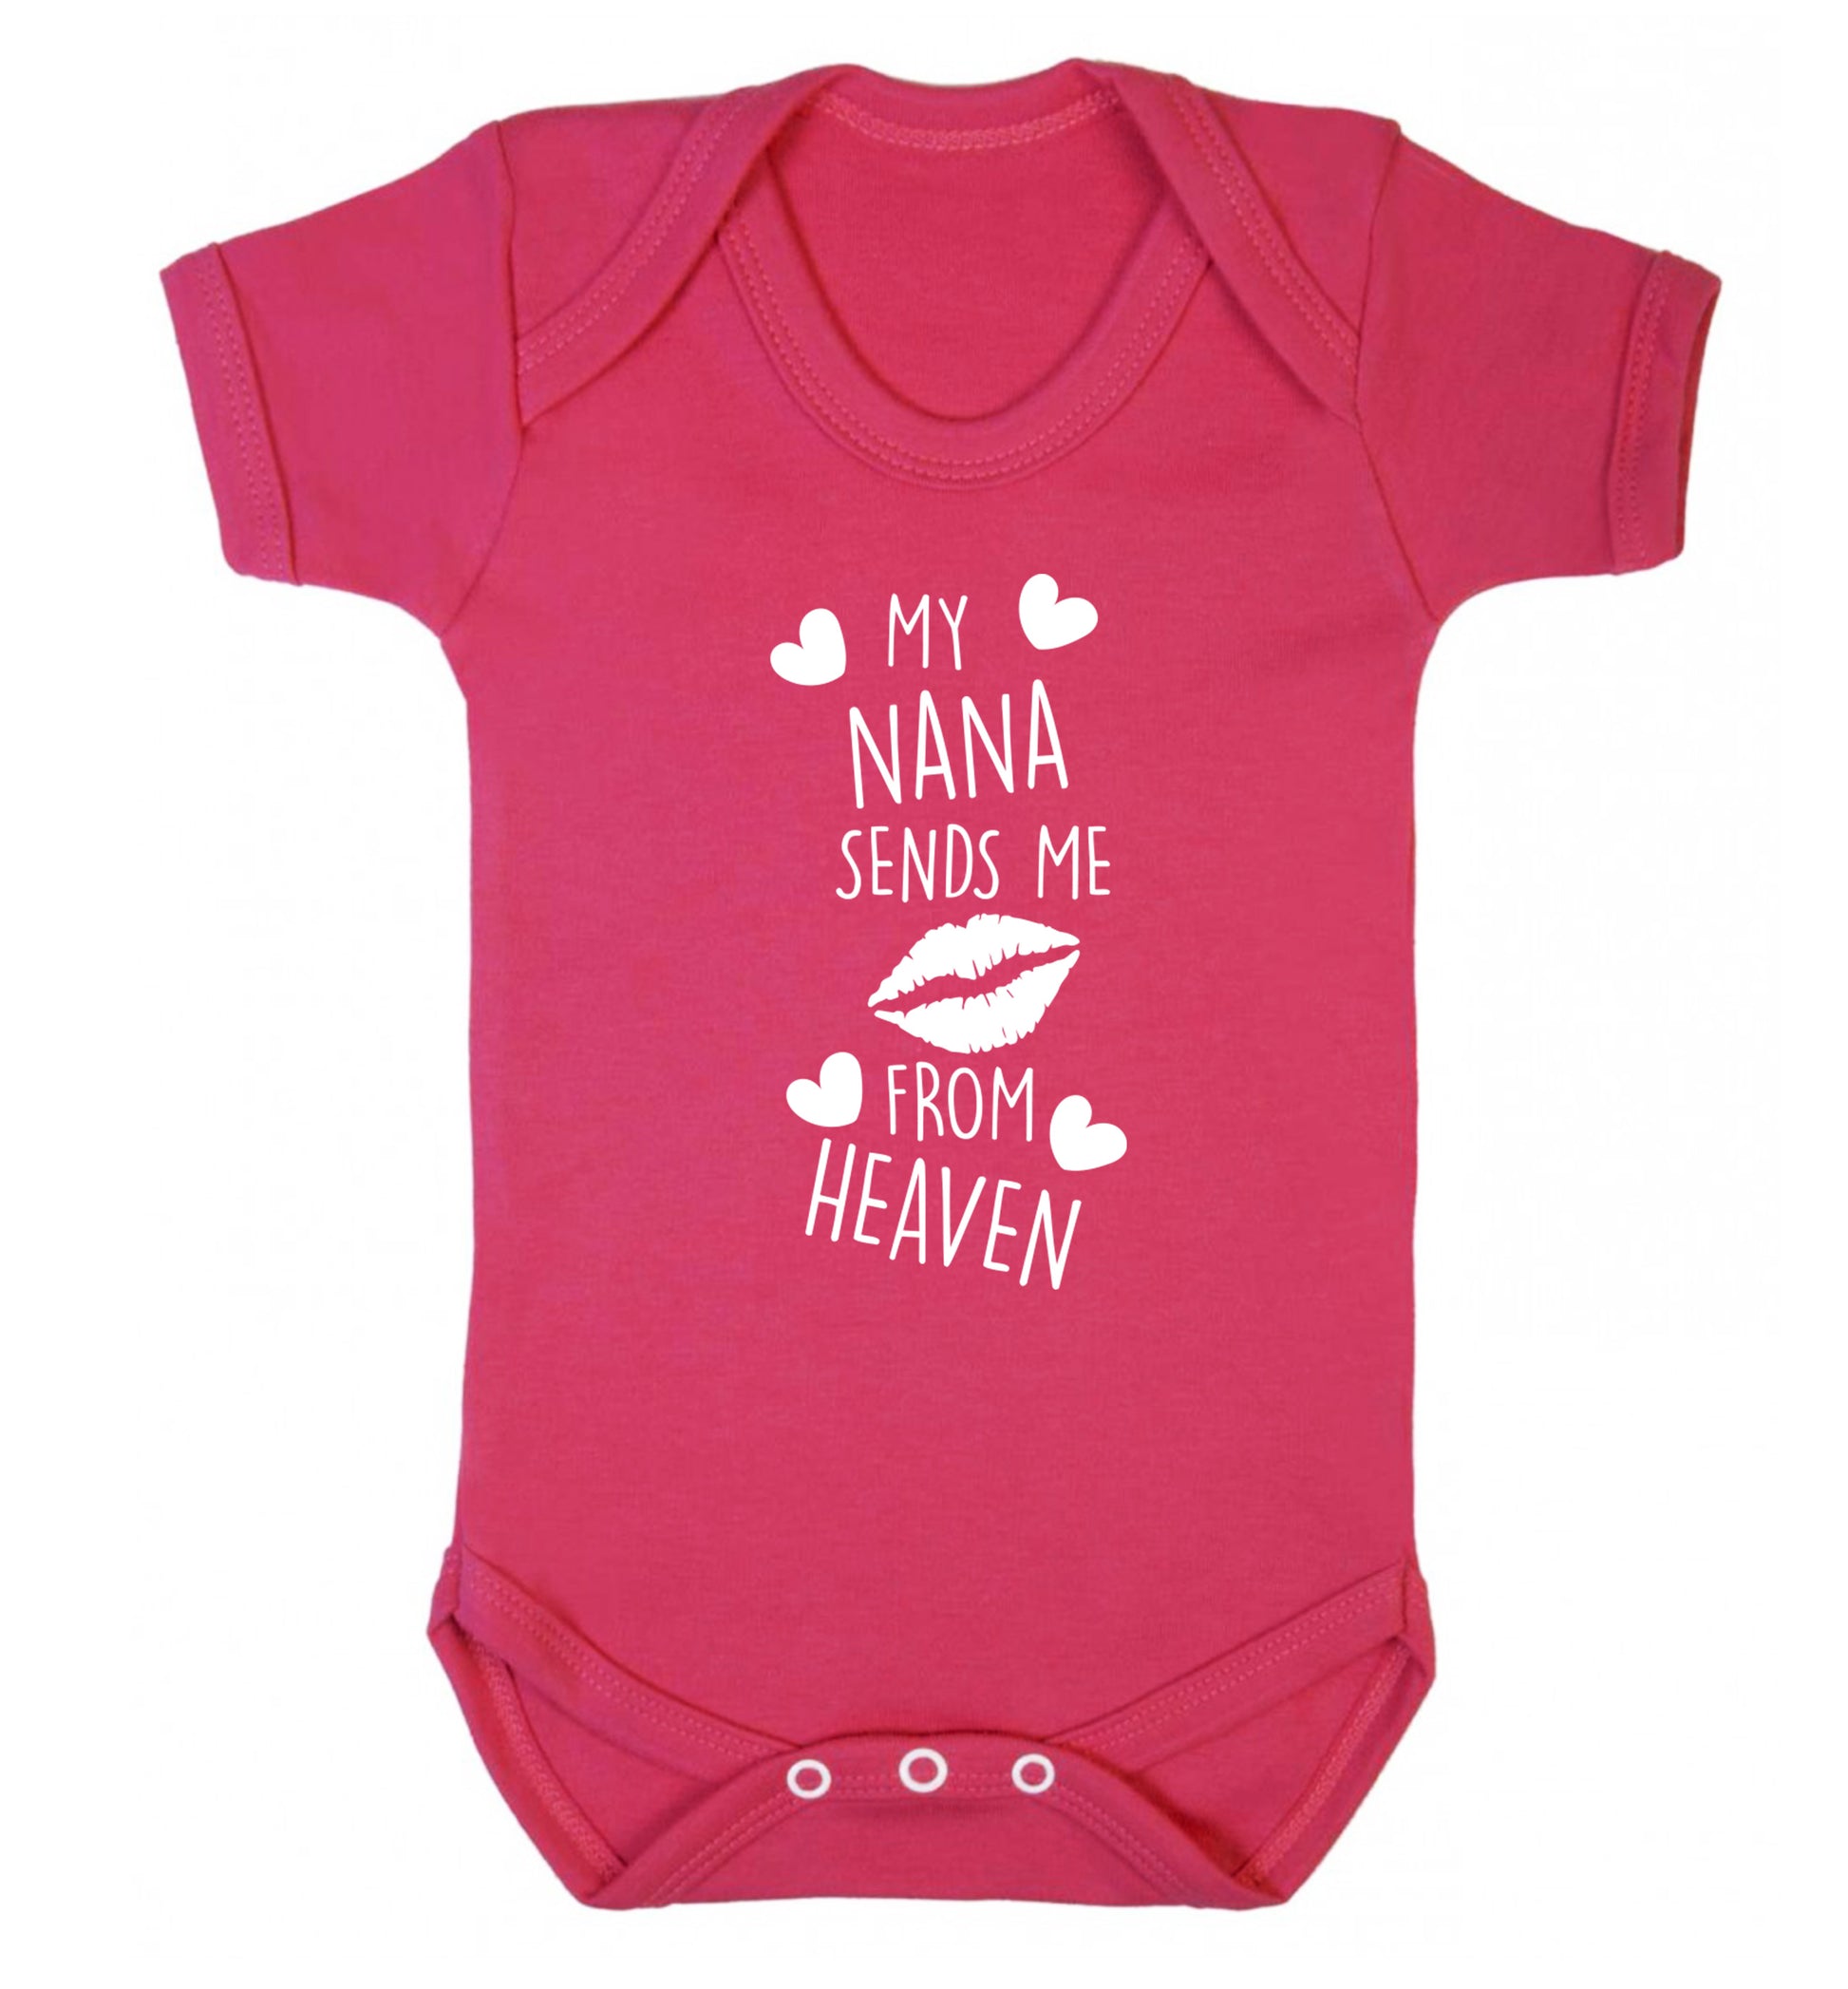 My nana sends me kisses from heaven Baby Vest dark pink 18-24 months